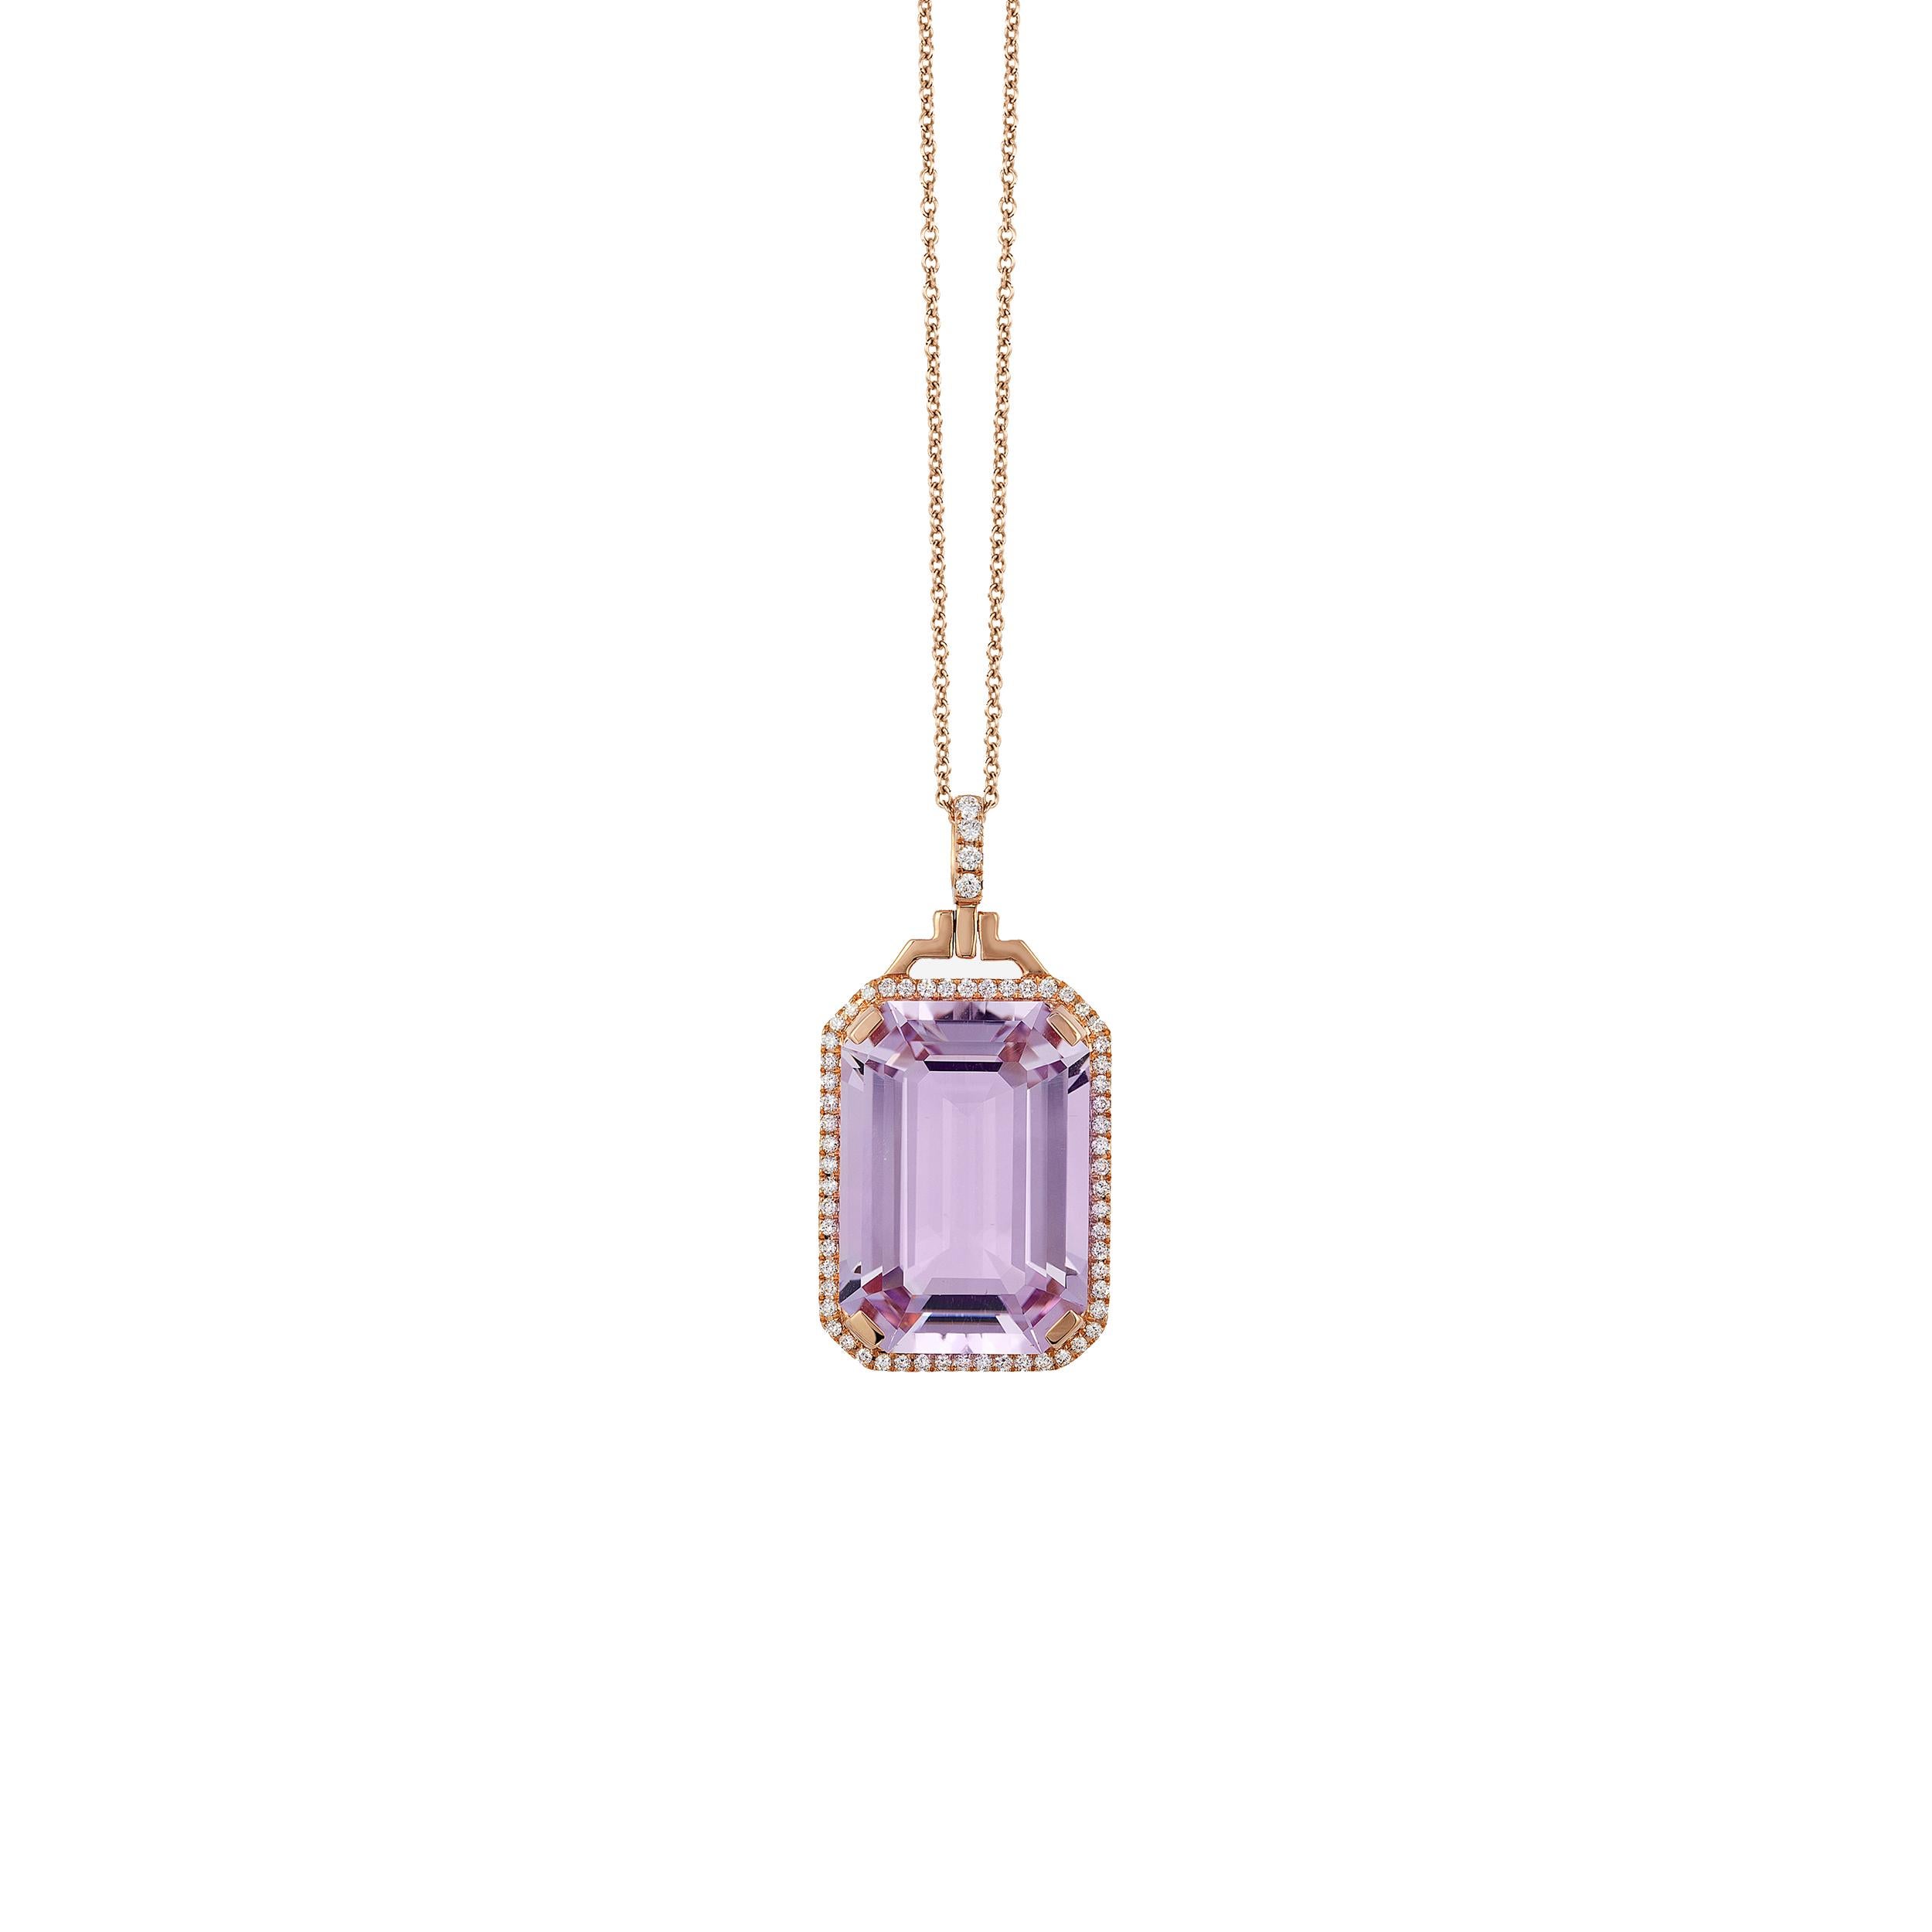 Lavender Amethyst Emerald Cut Pendant with Diamonds in 18K Yellow Gold, from 'Gossip' Collection 
 
 on a 18'' Chain
 
 Stone Size: 14 x 20 mm 
 
 Gemstone Approx Wt: Lavender Amethyst-16.44 Carats 
 
 Diamonds: G-H / VS, Approx Wt : 0.30 Carats